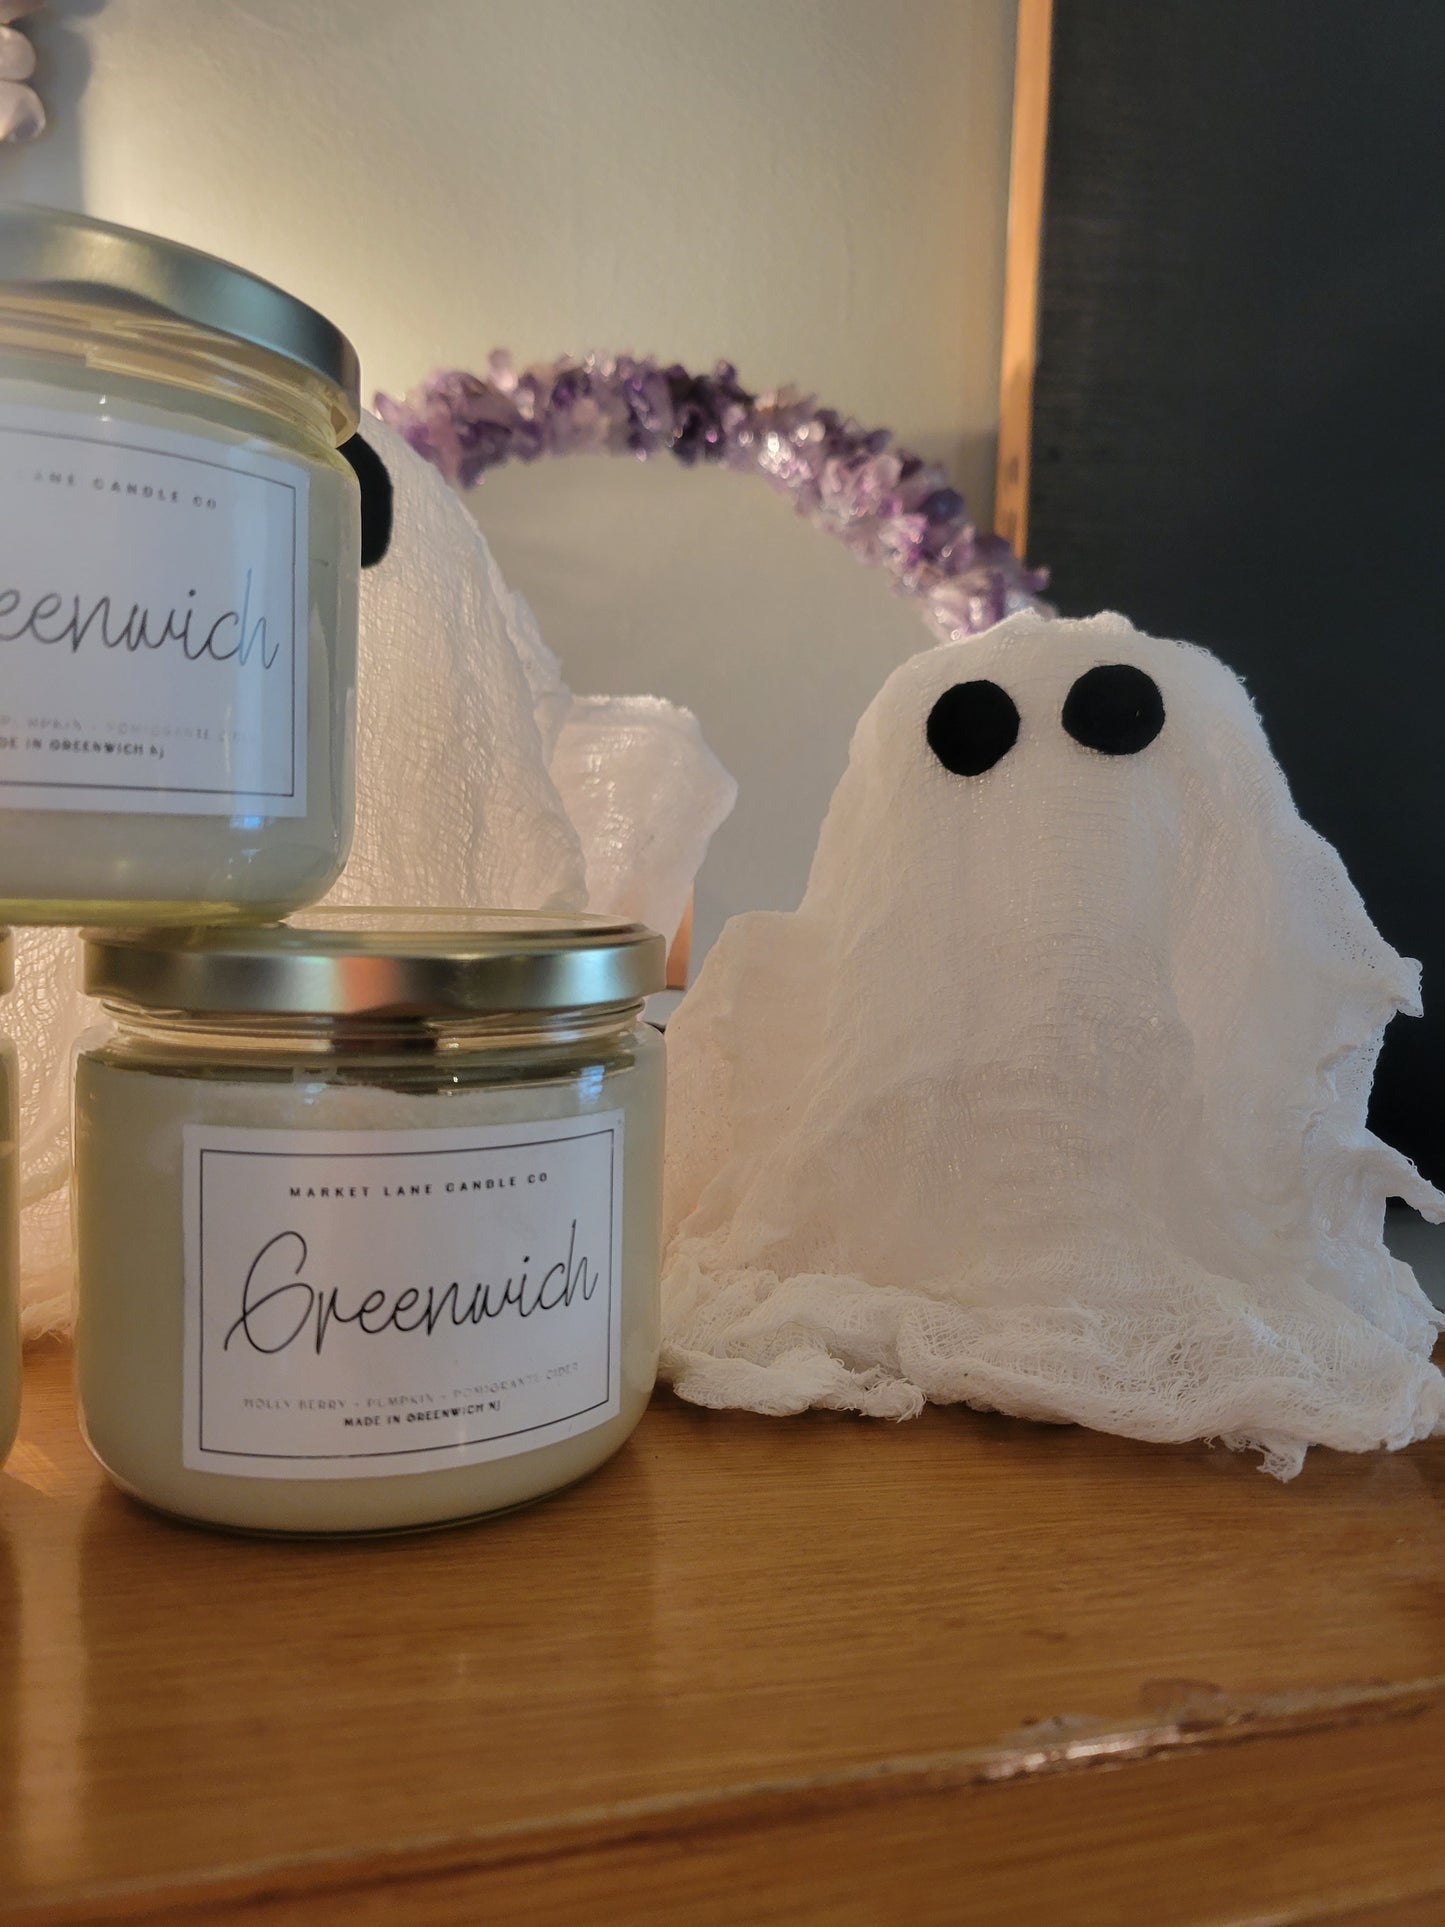 Greenwich Candles!